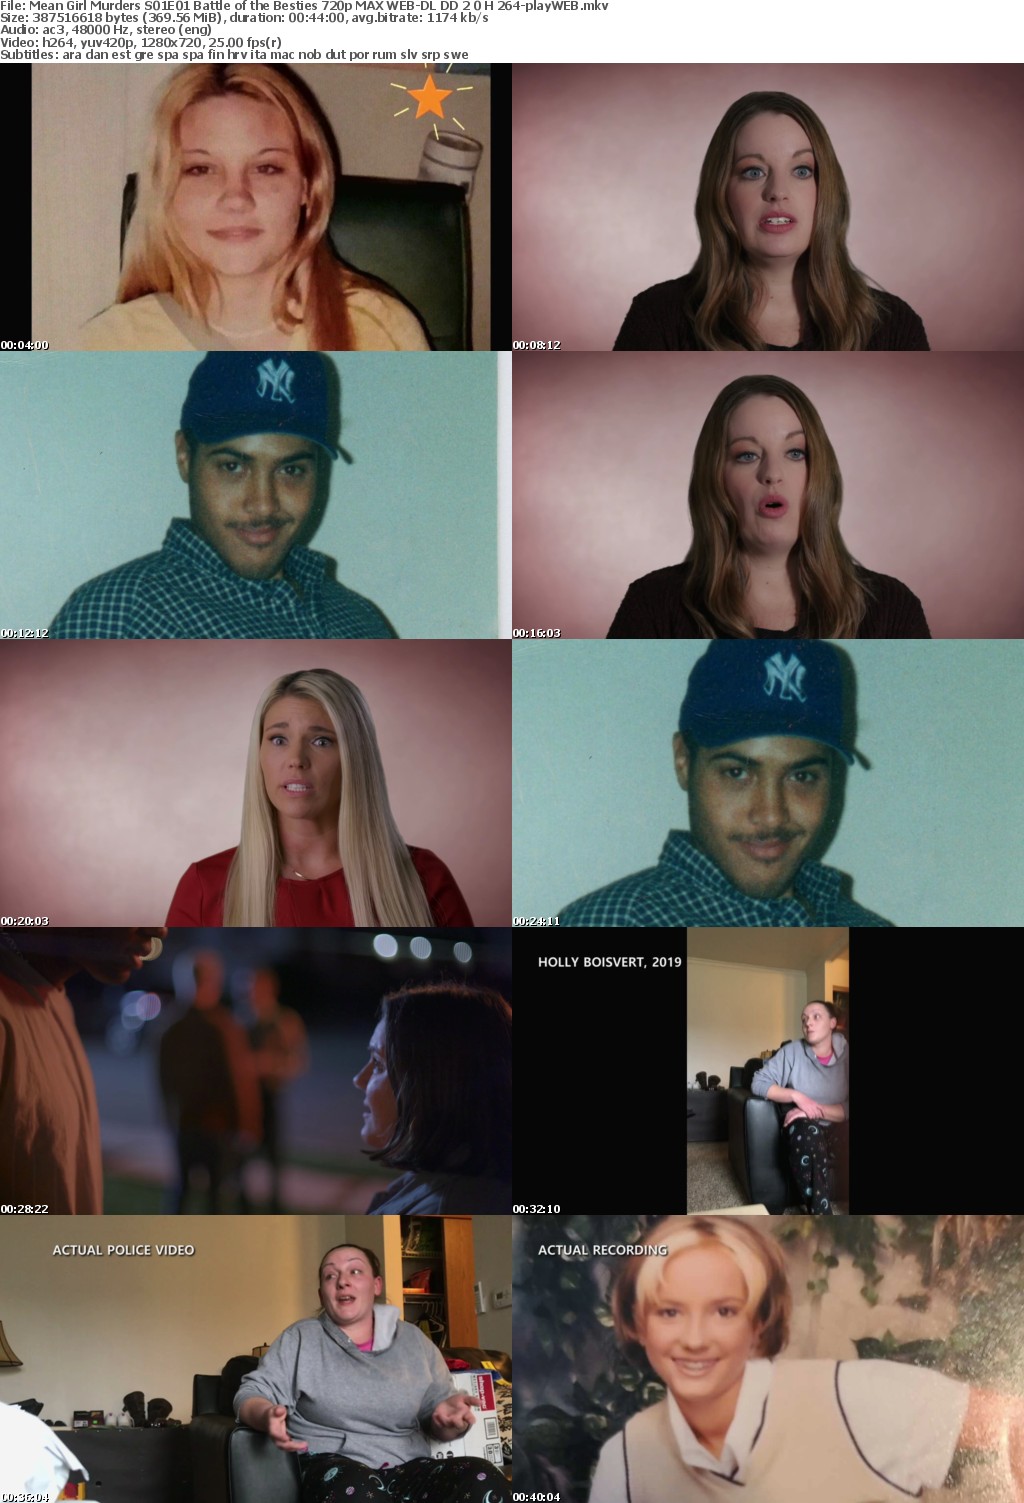 Mean Girl Murders S01E01 Battle of the Besties 720p MAX WEB-DL DD 2 0 H 264-playWEB